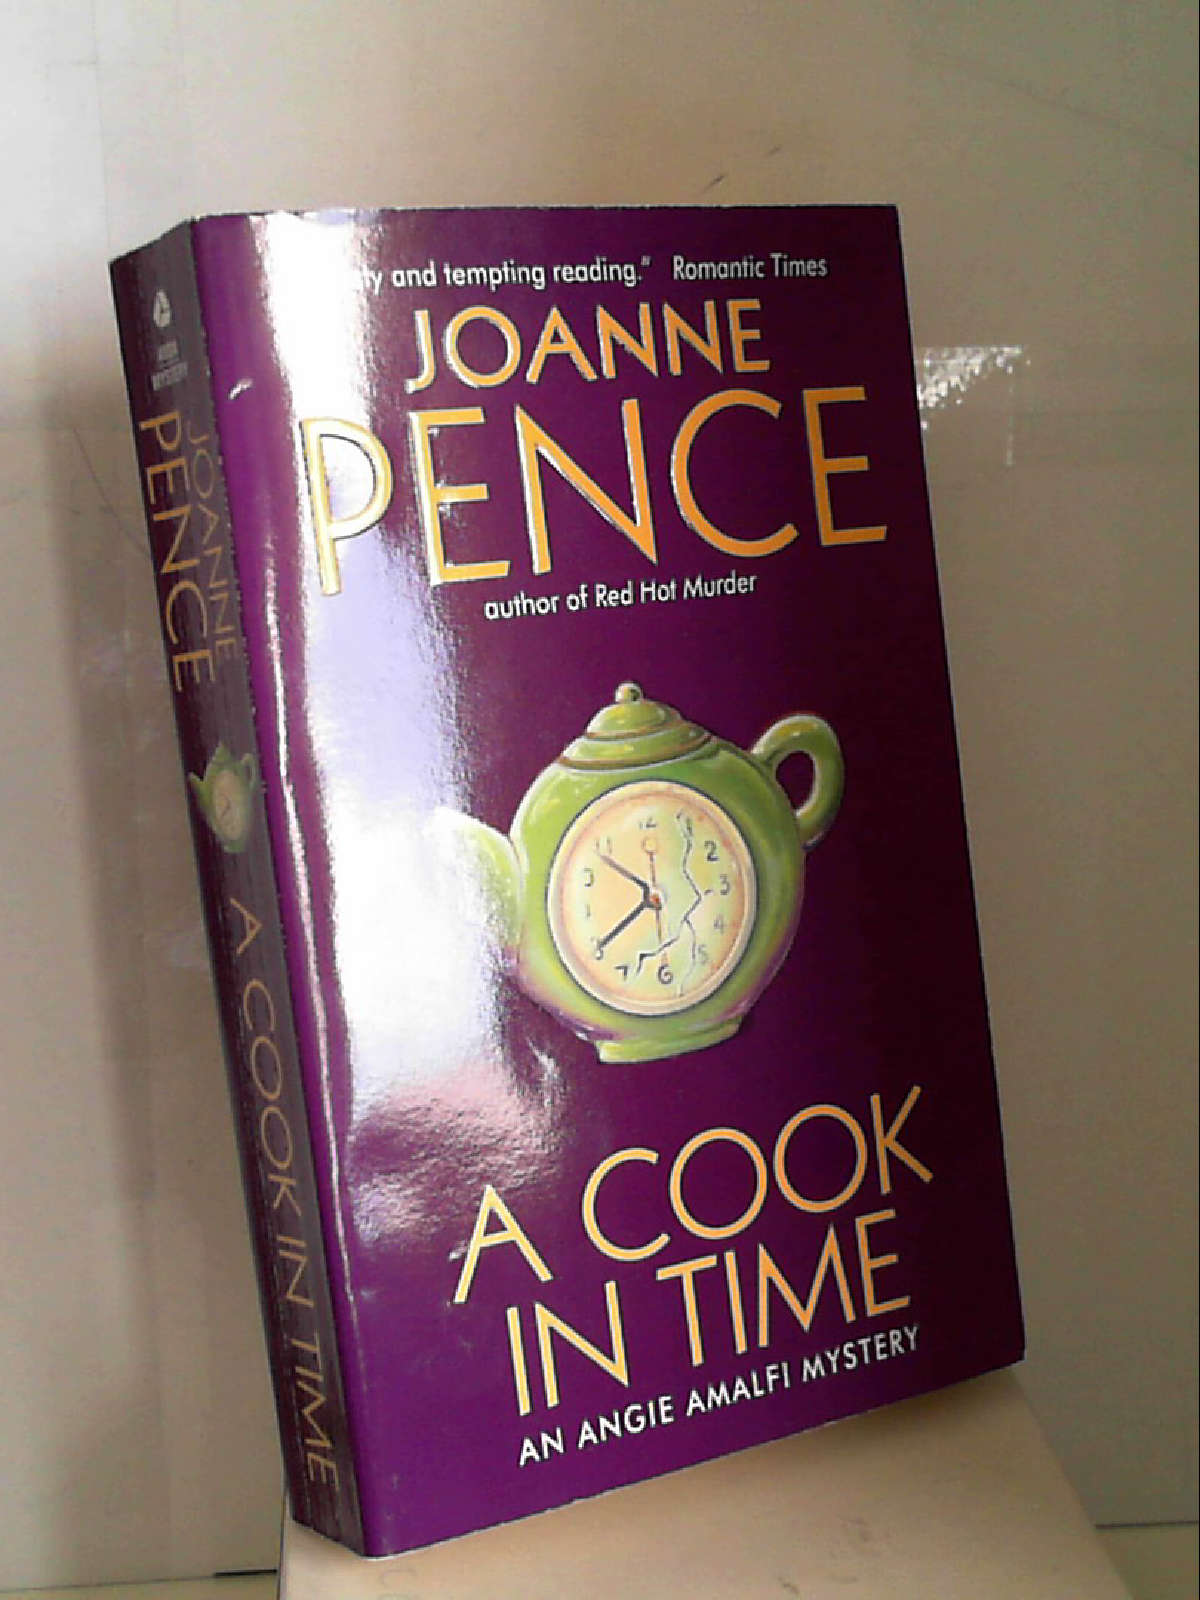 A Cook in Time: An Angie Amalfi Mystery